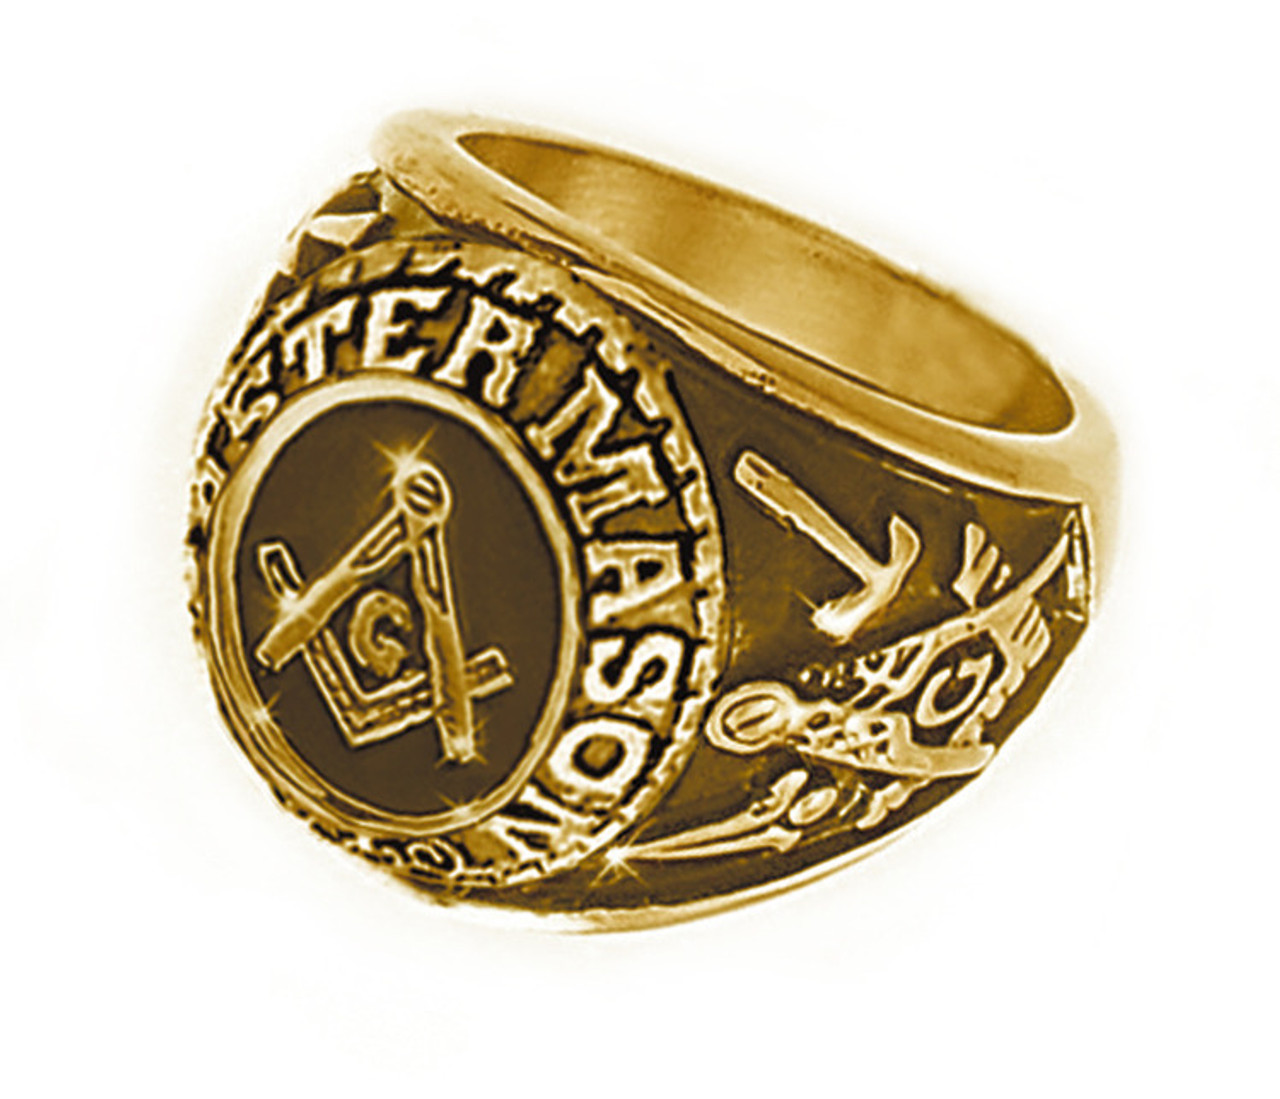 Mason Gold Color Freemason College Style Masonic Rings - with classic center design and etched symbols - Stainless Steel w/ Gold Plating